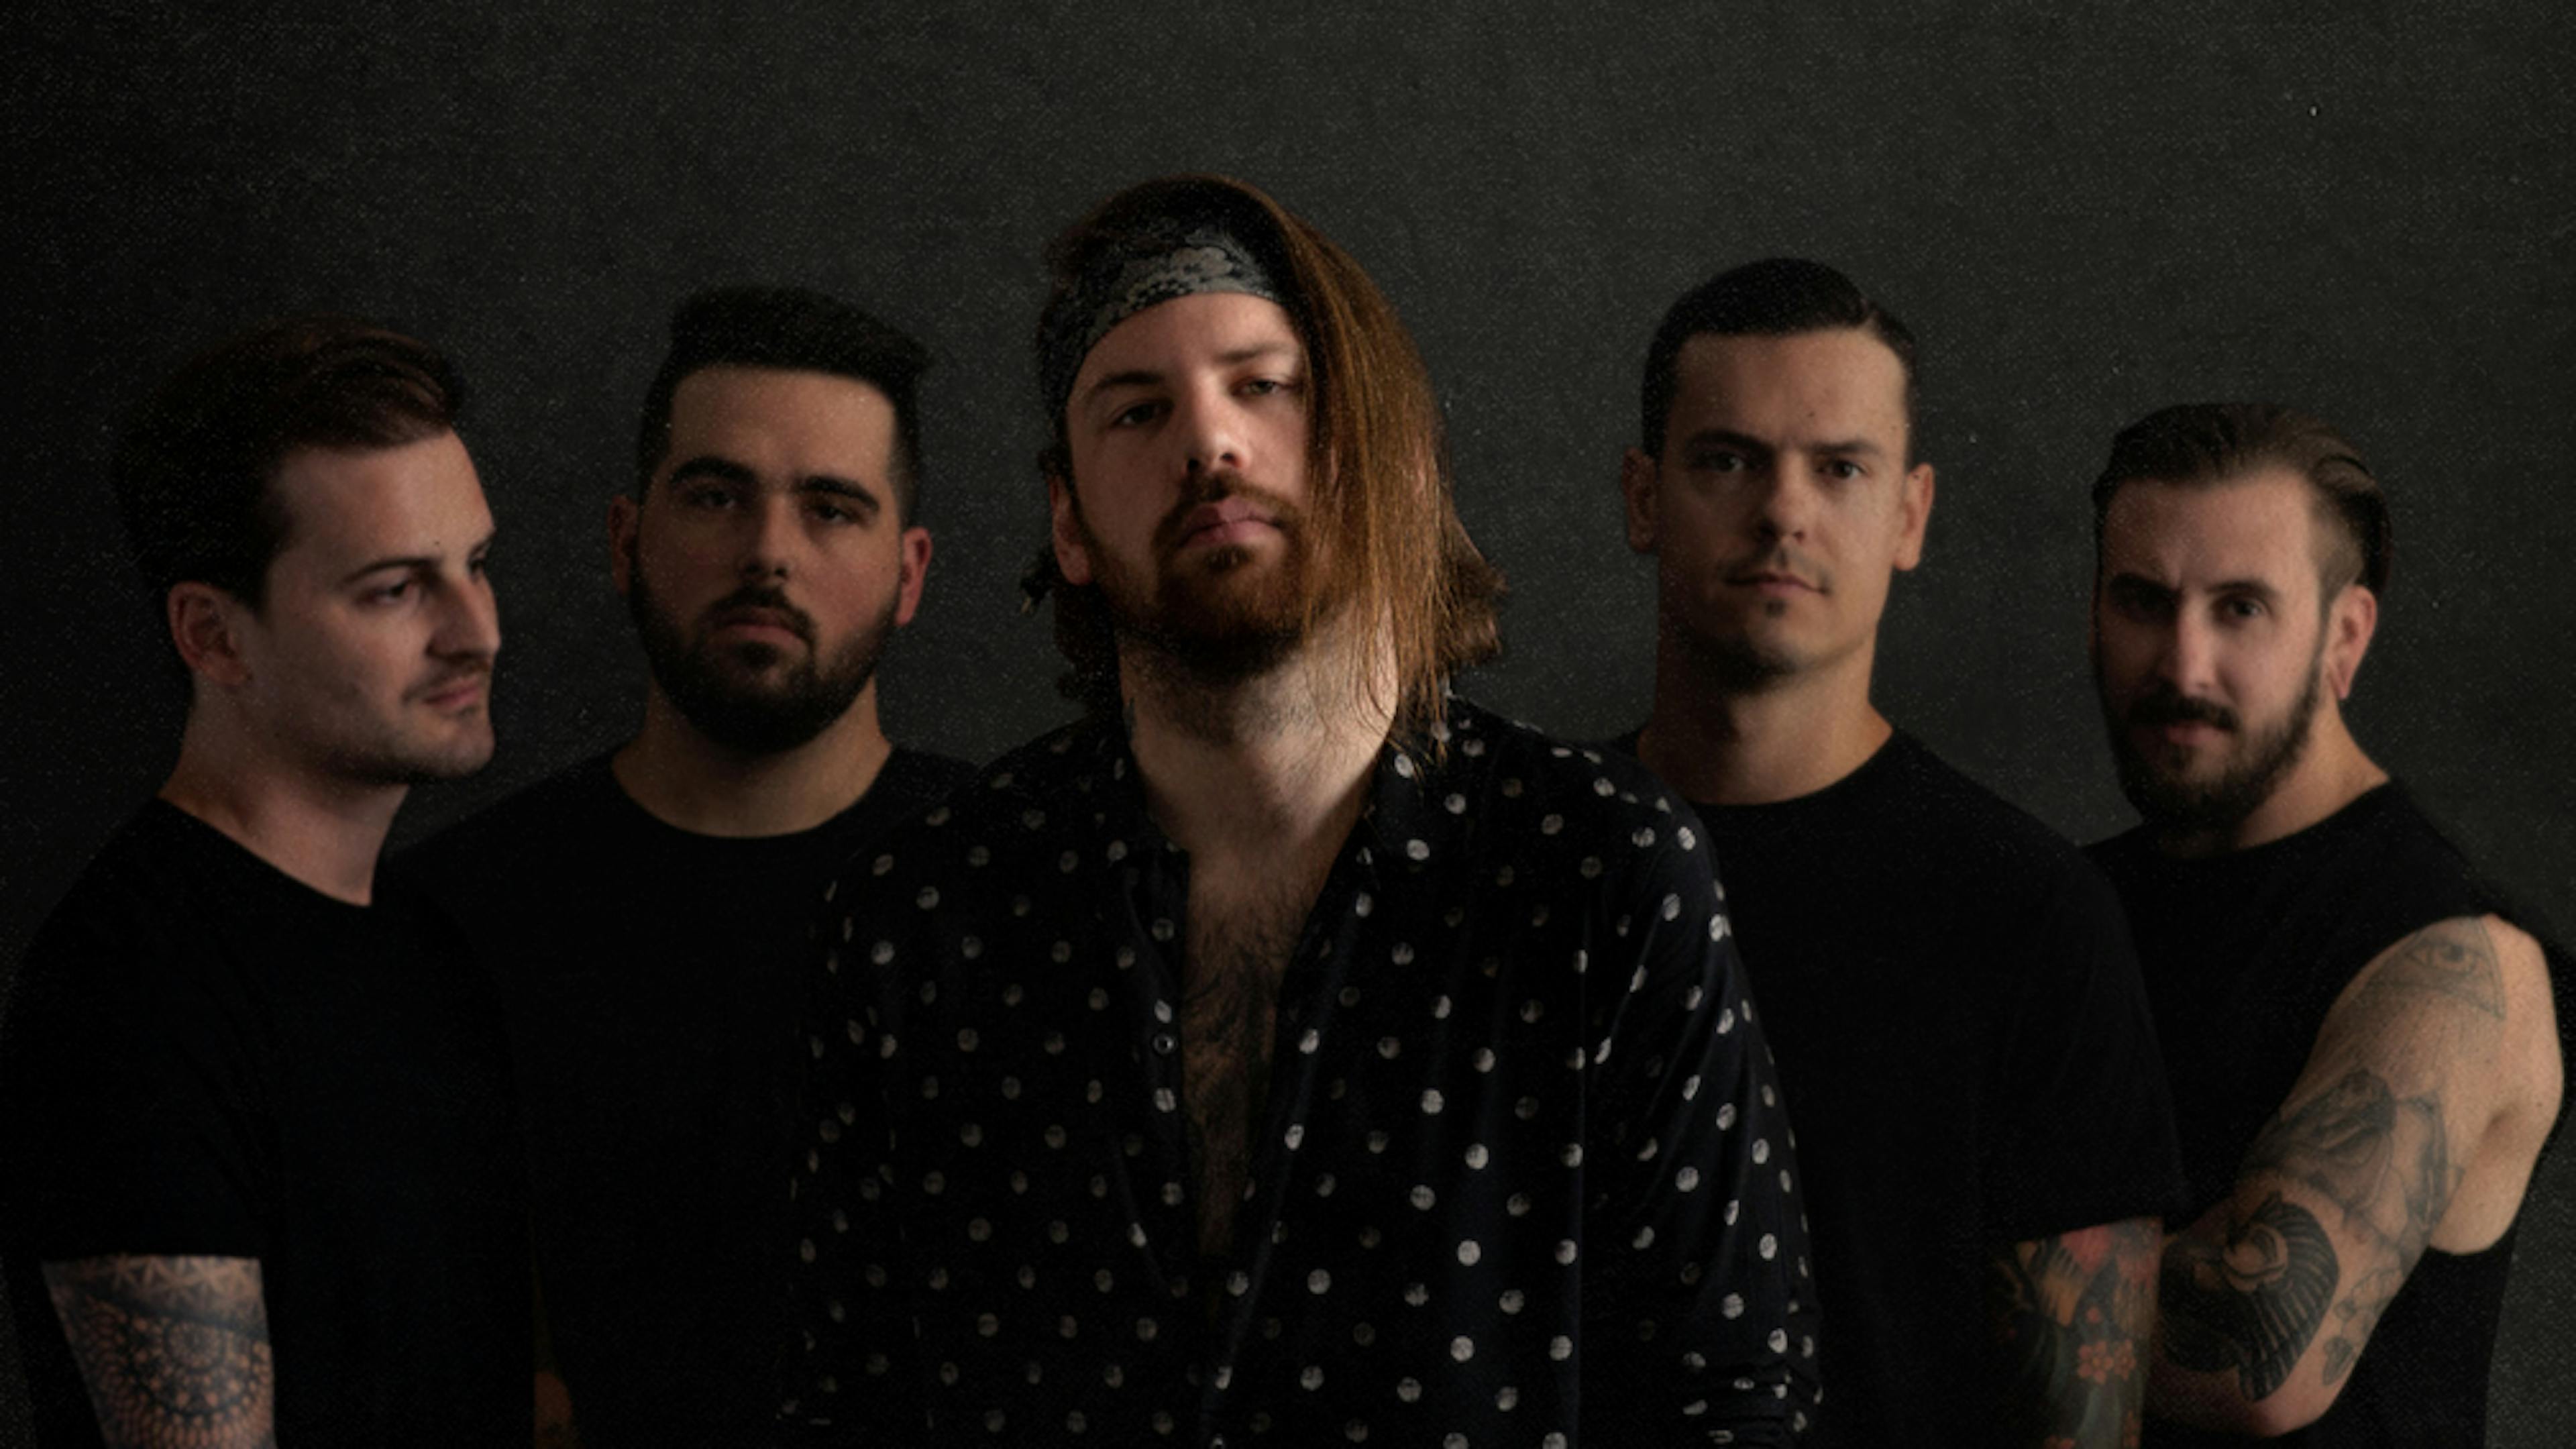 Beartooth Have Announced A 2020 Headline Tour – Tickets On Sale Now